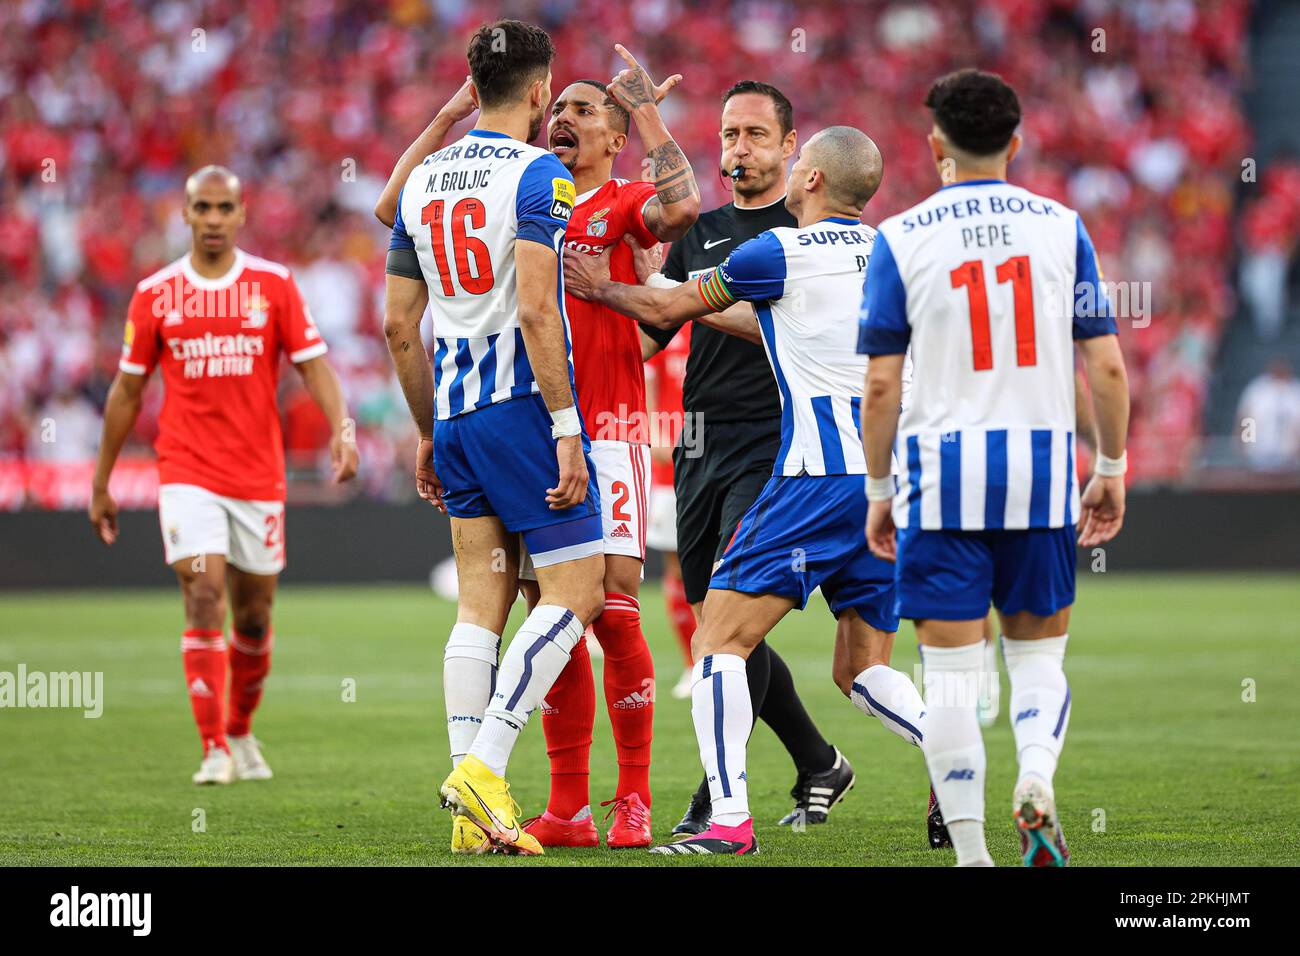 Lisboa, Portugal. 07th Apr, 2023. Gilberto Moraes Júnior of SL Benfica (No.2) argues with Marko Grujic of FC Porto (No.16) in action during the Liga Portugal Bwin match between SL Benfica and FC Porto at Estadio da Luz in Lisbon.(Final score: SL Benfica 1 - 2 FC Porto) (Photo by David Martins/SOPA Images/Sipa USA) Credit: Sipa USA/Alamy Live News Stock Photo